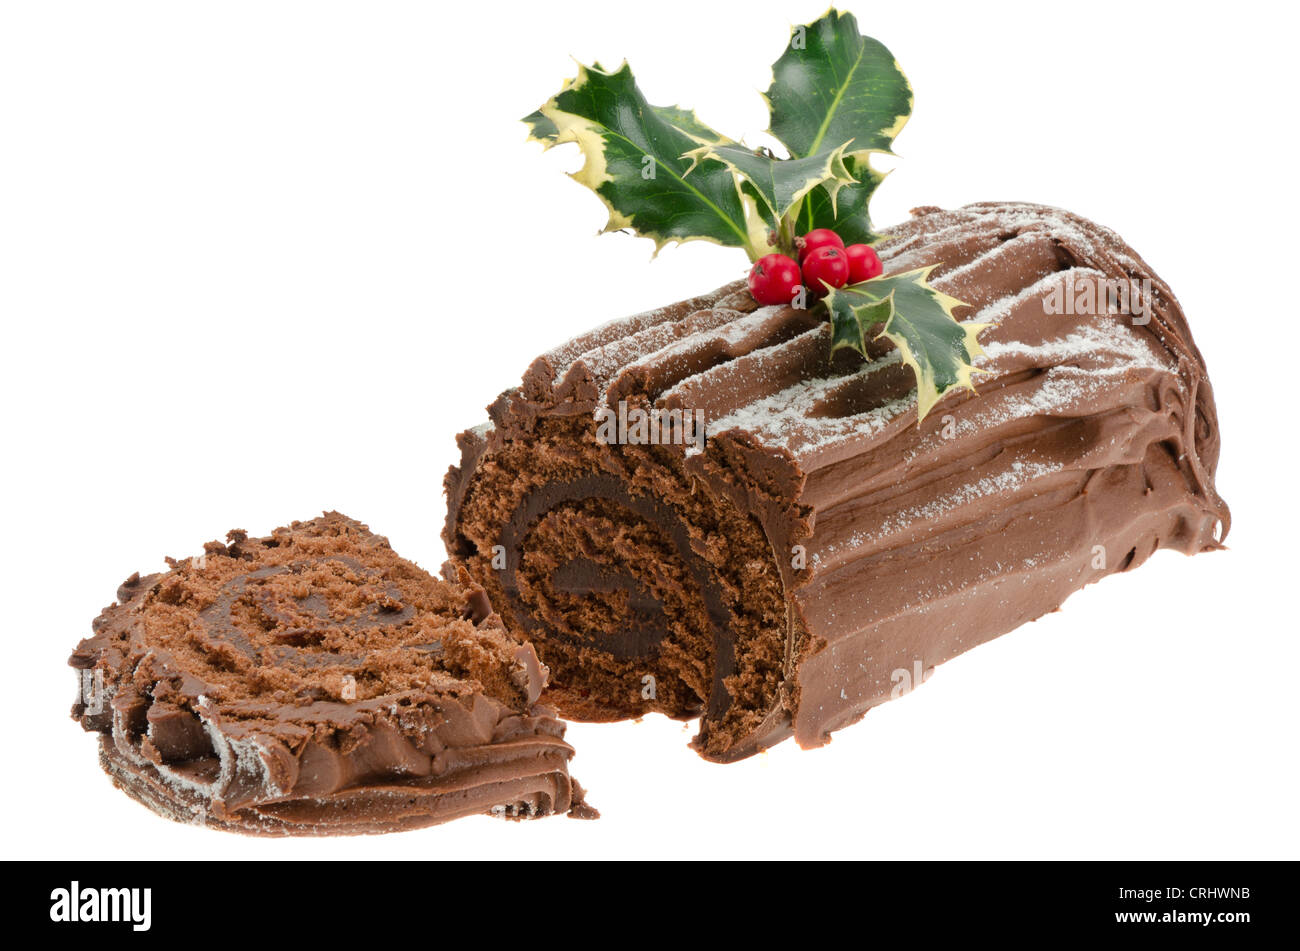 Chocolate Yule log - studio shot with a white background Stock Photo